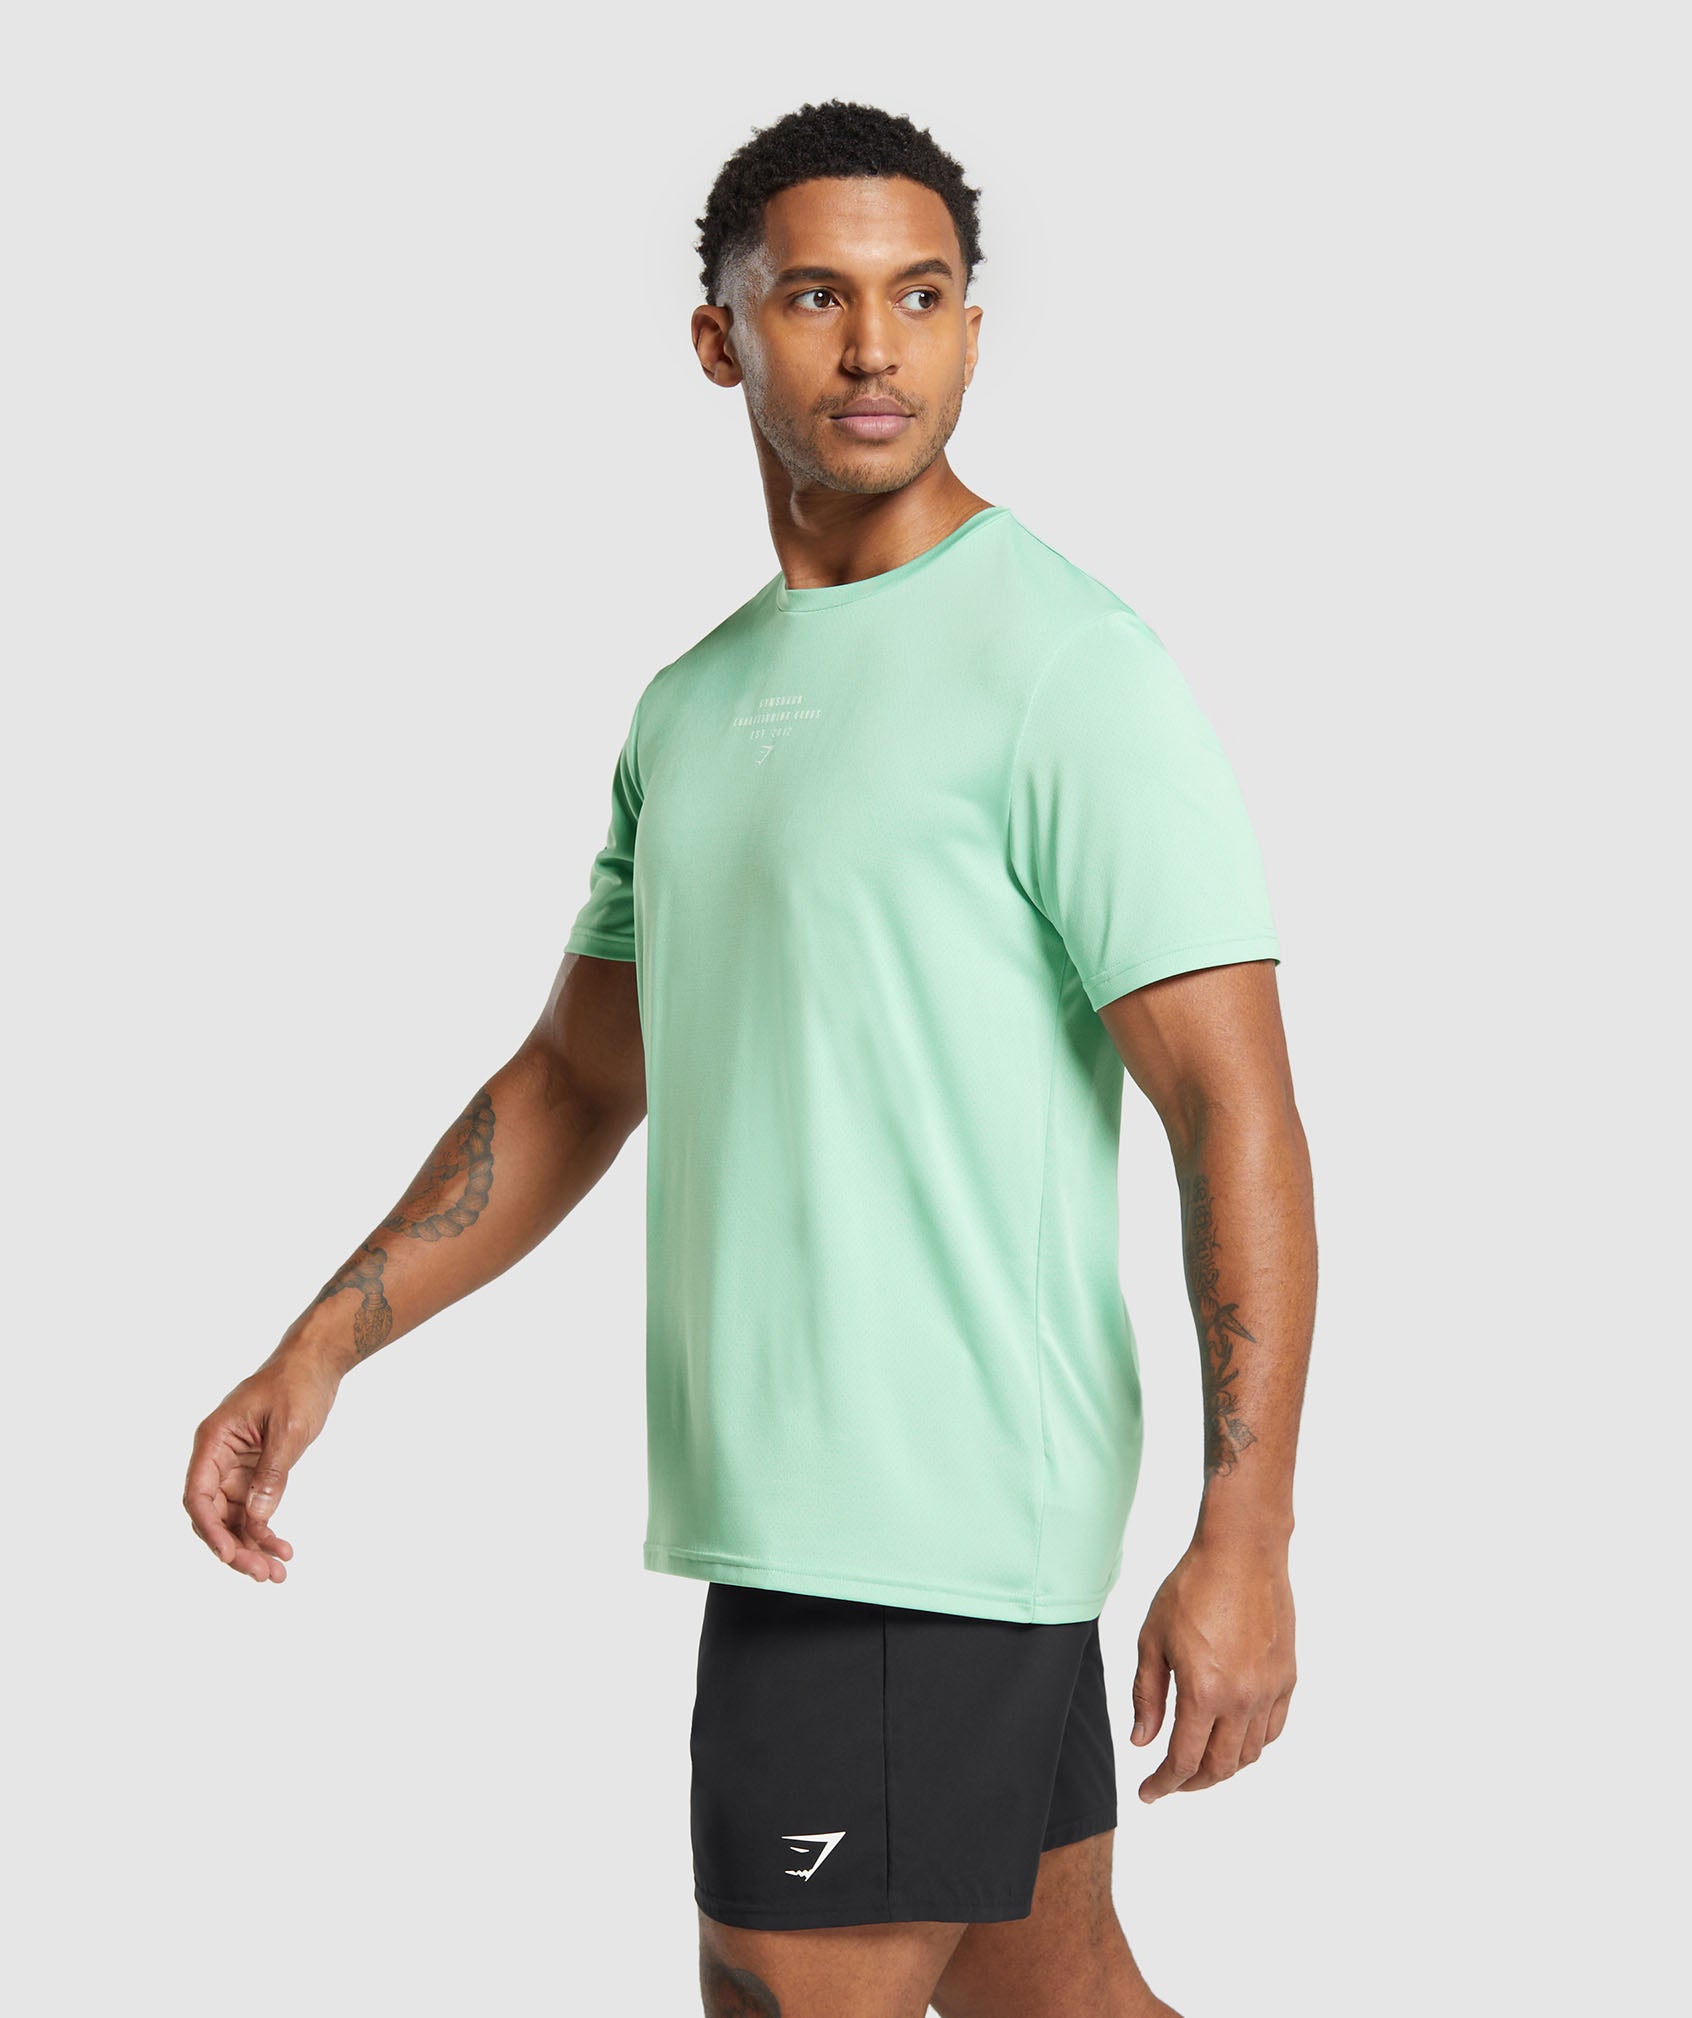 Conditioning Goods T-Shirt in Lido Green - view 3